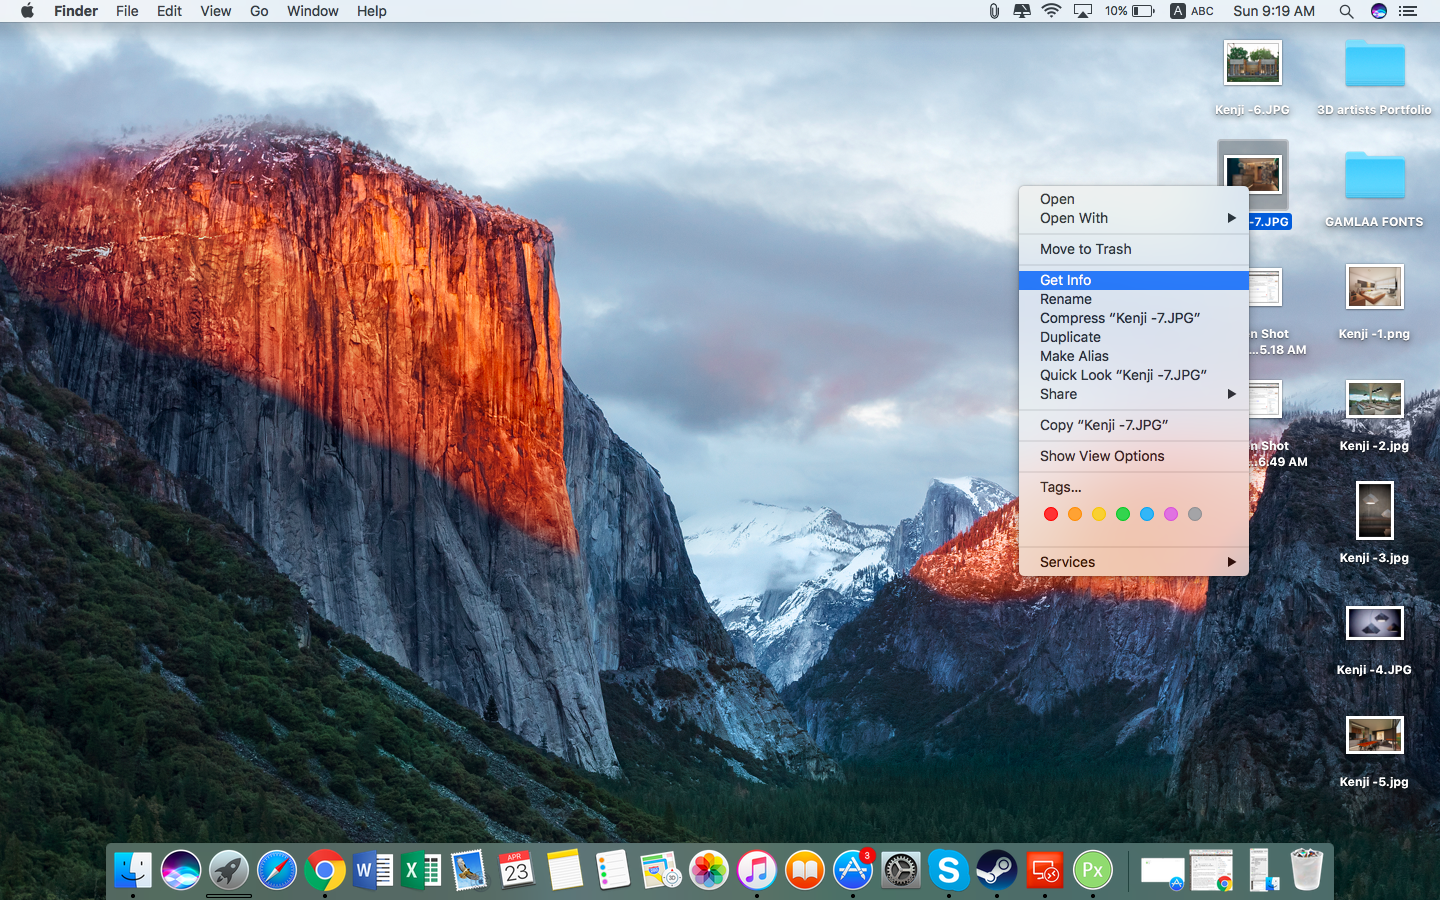 picture viewer for mac where you can rate photos